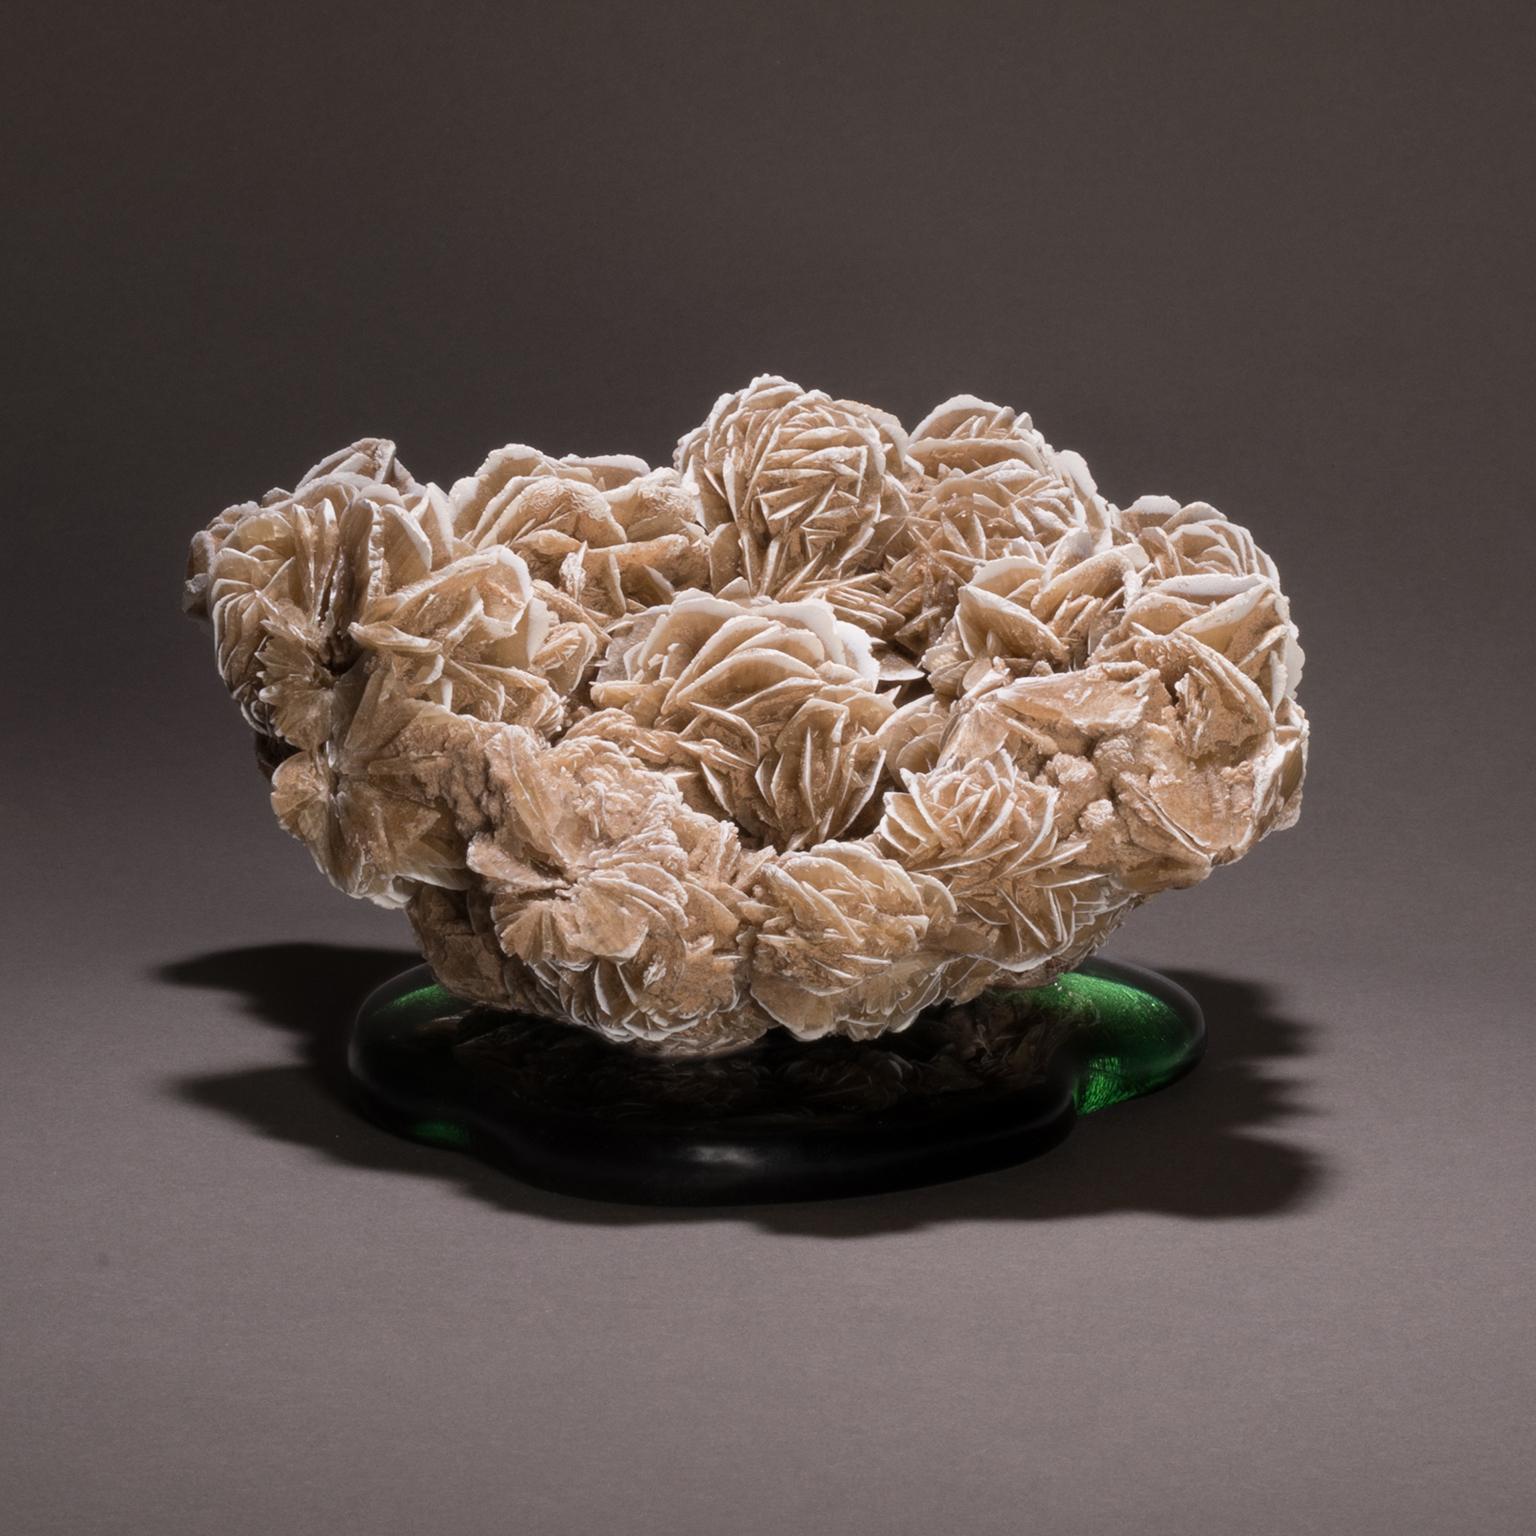 Desert rose gypsum on cast glass

Gypsum is the Cinderella of the mineral world. It is one of the most widely used non-metallic minerals, taking on critical, if sometimes unglamorous, roles in many components of daily life. And yet its beauty is